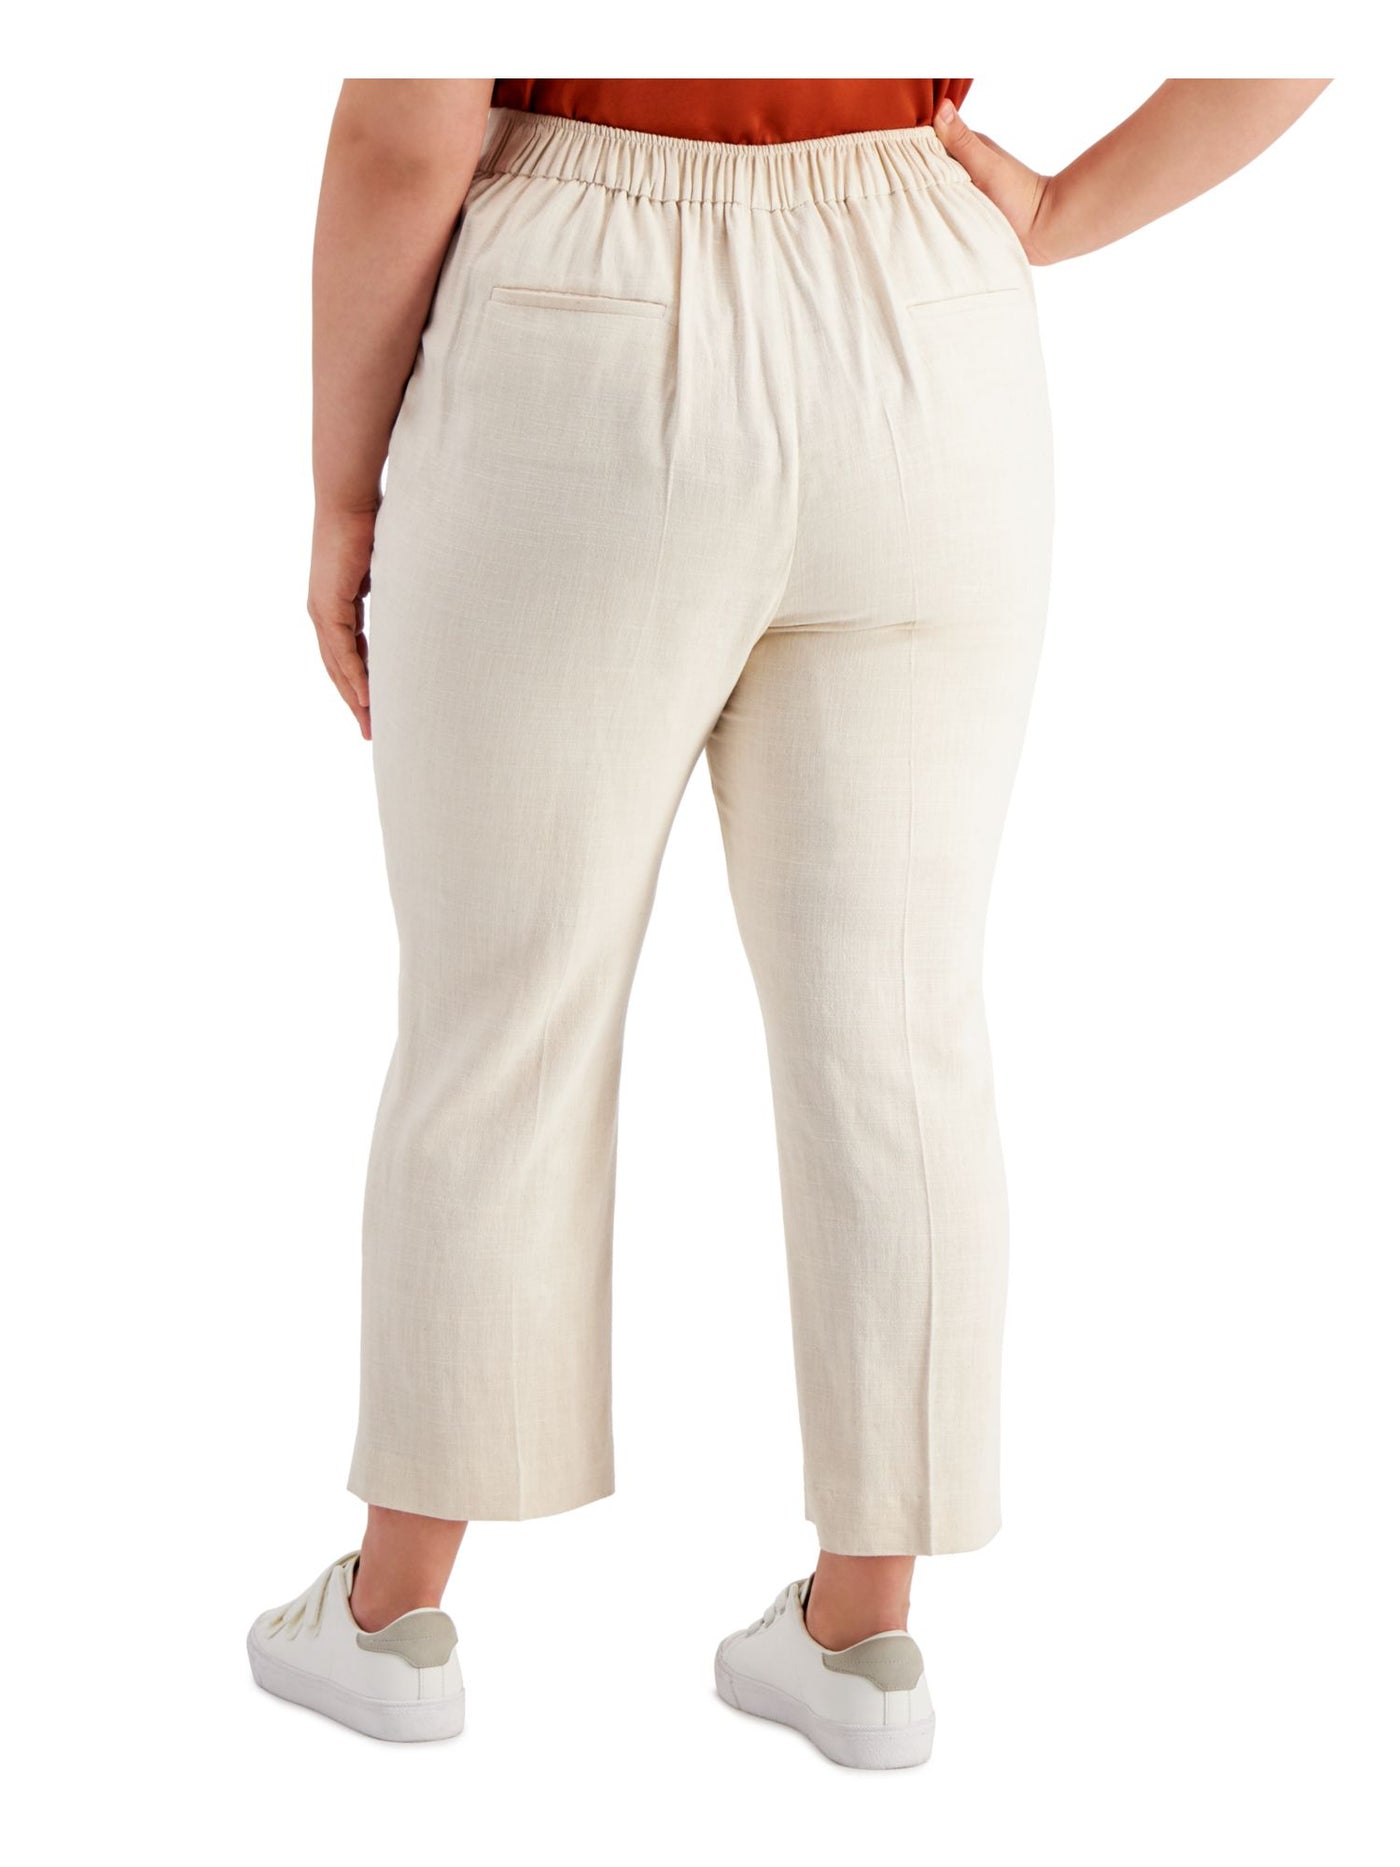 BAR III Womens Pocketed Stretch Pull-on Wear To Work High Waist Pants